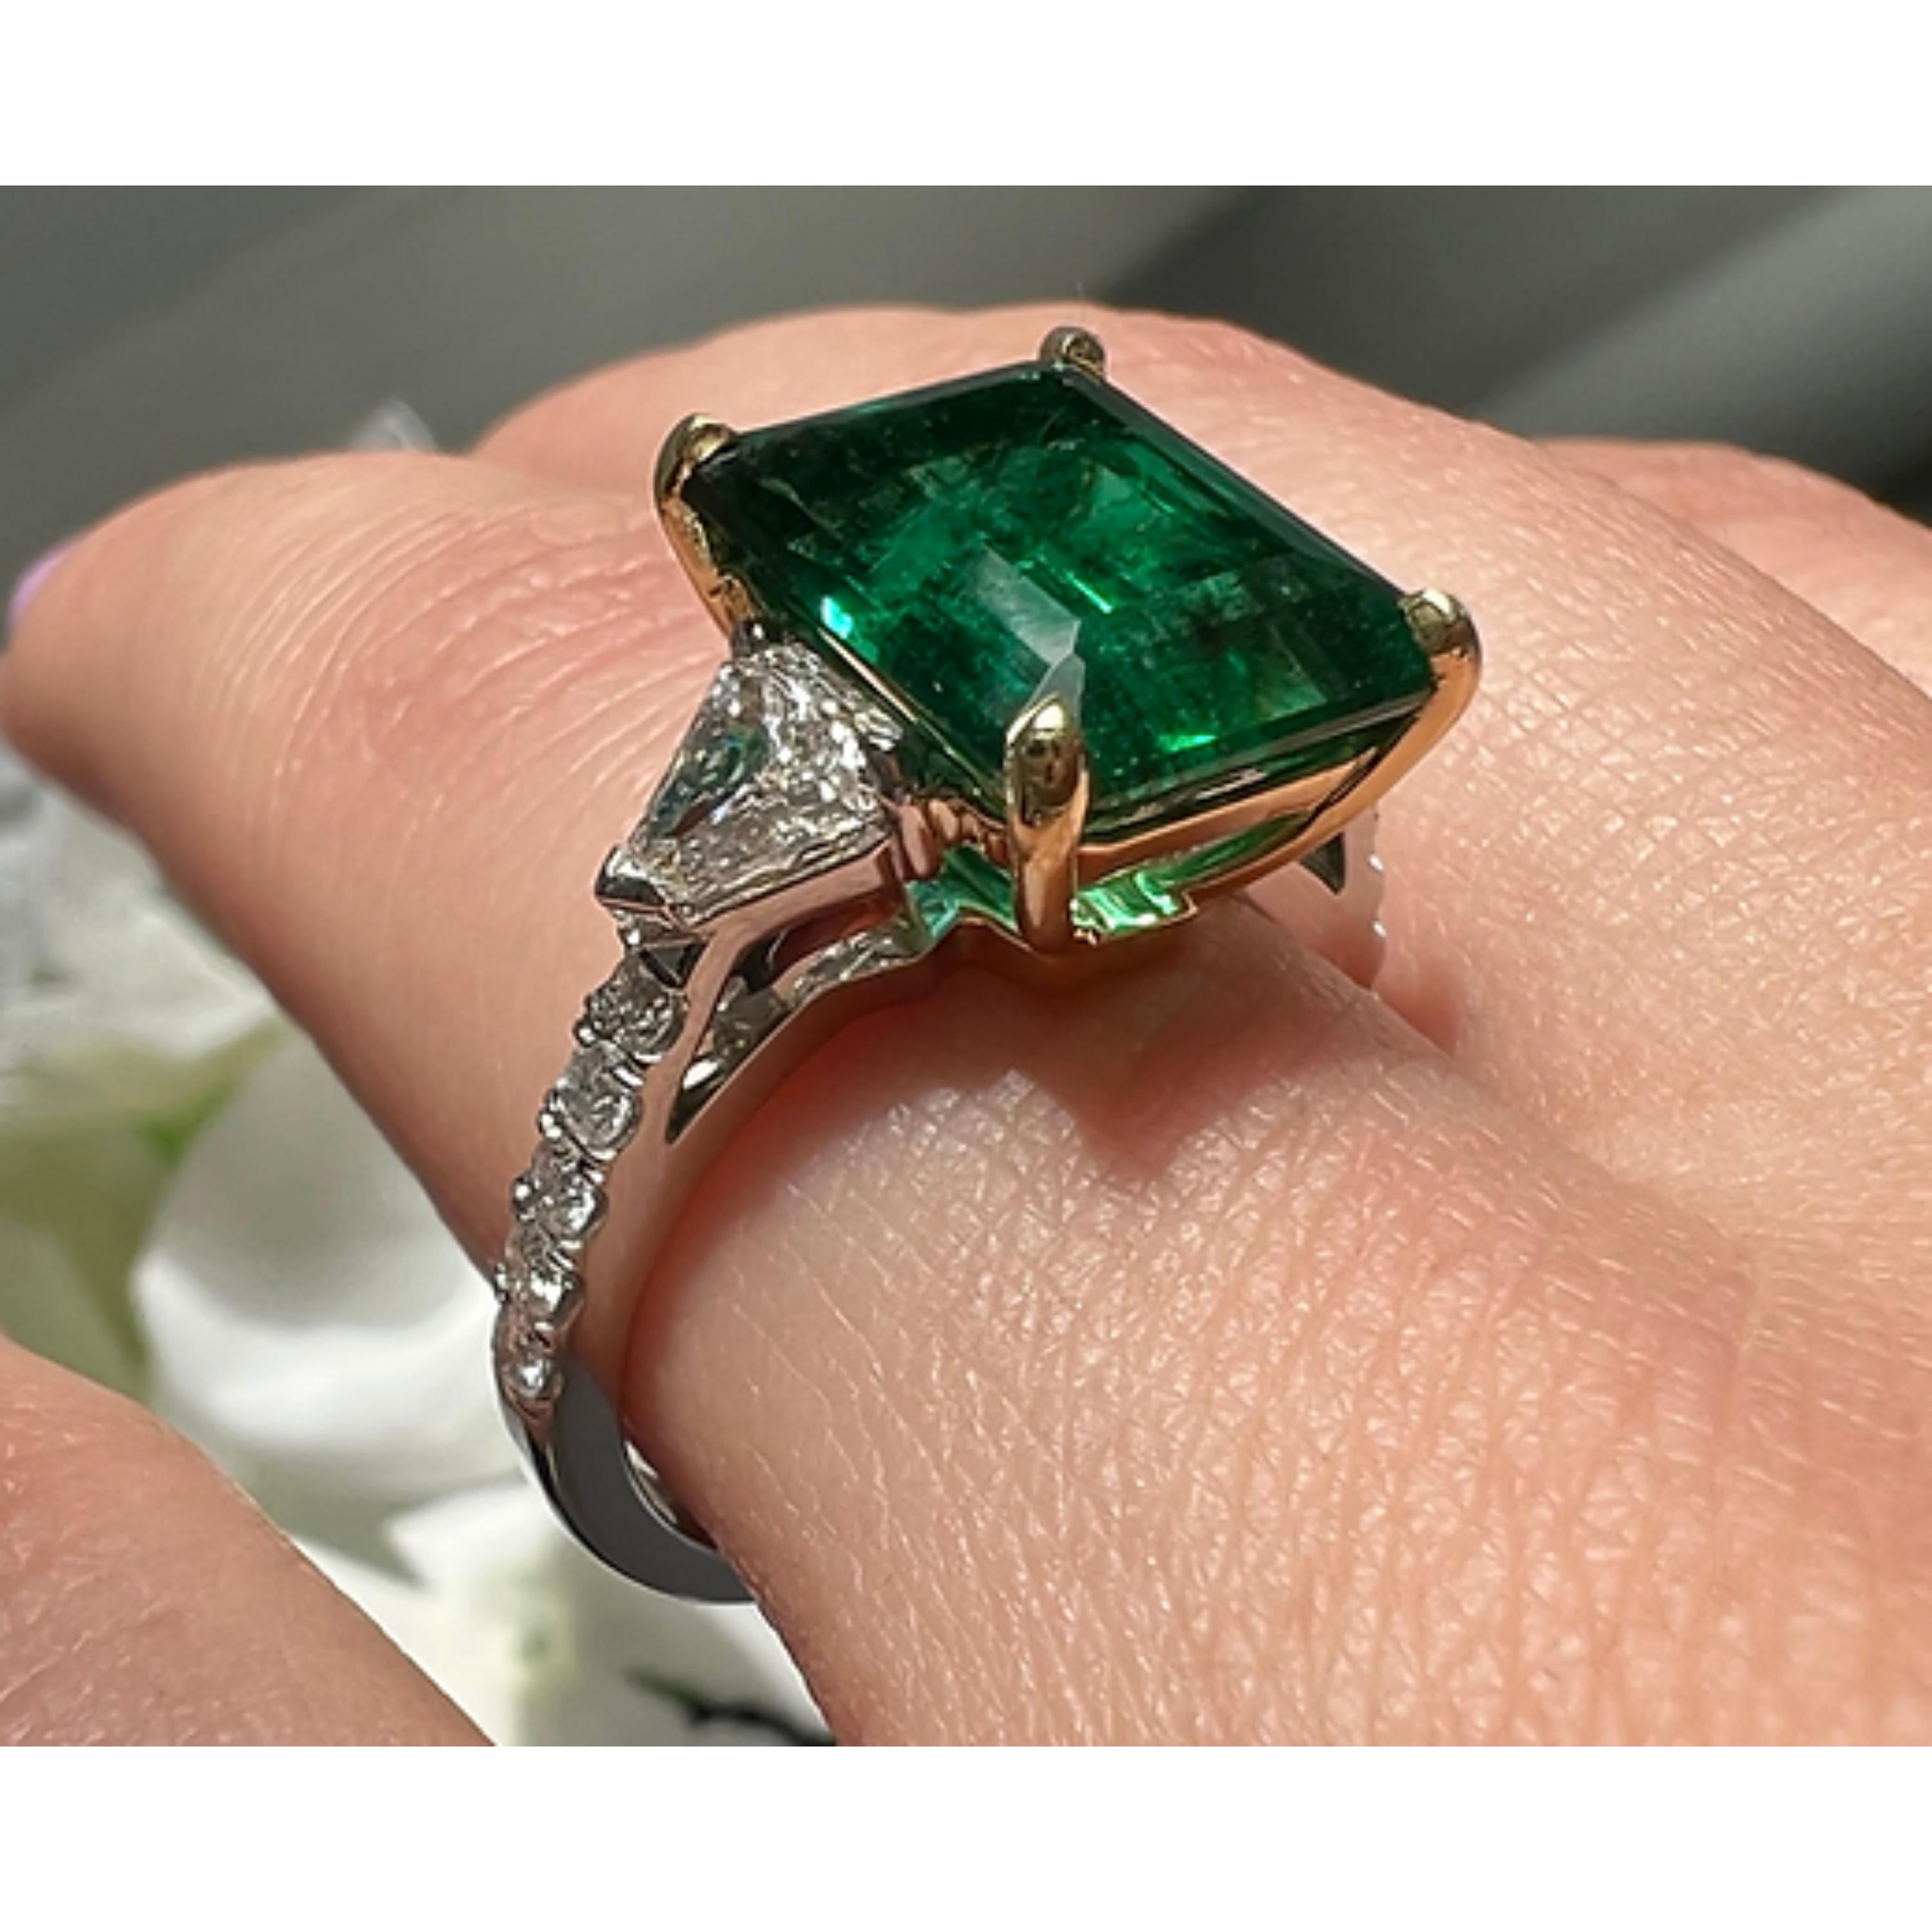 For Sale:  5 Carat Natural Emerald Diamond Engagement Ring Set in 18K Gold, Cocktail Ring 2